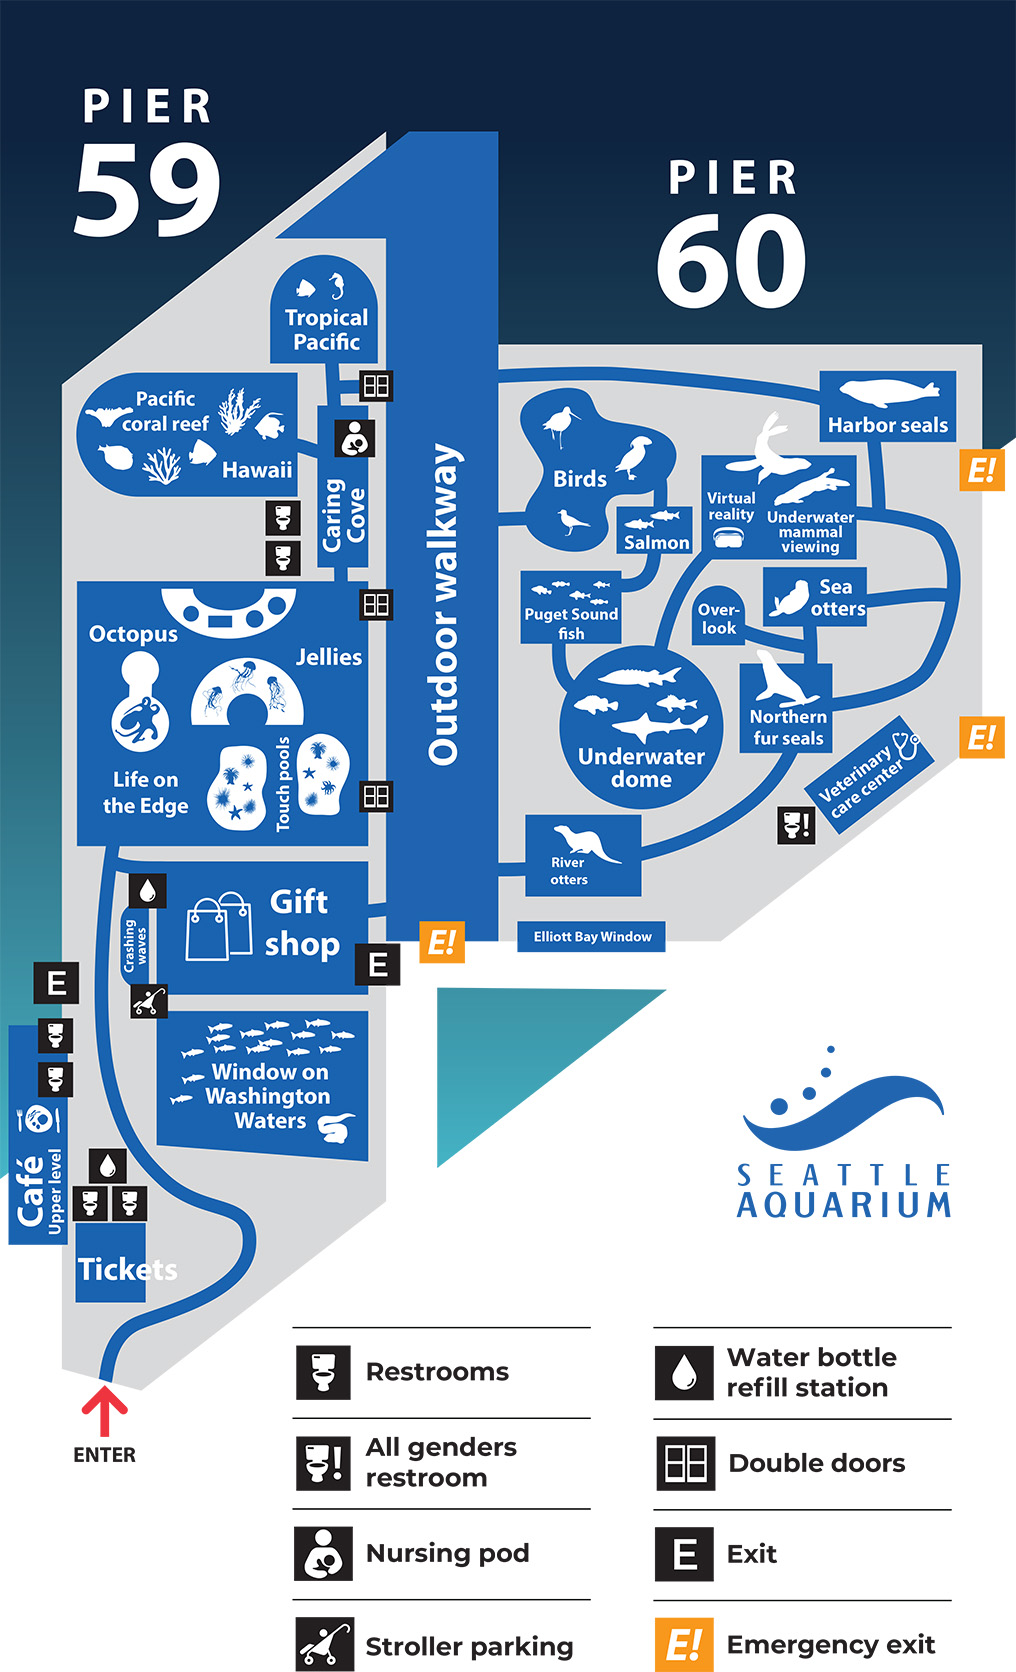 Map of the Seattle Aquarium facility layout across the Pier 59 and Pier 60 buildings.